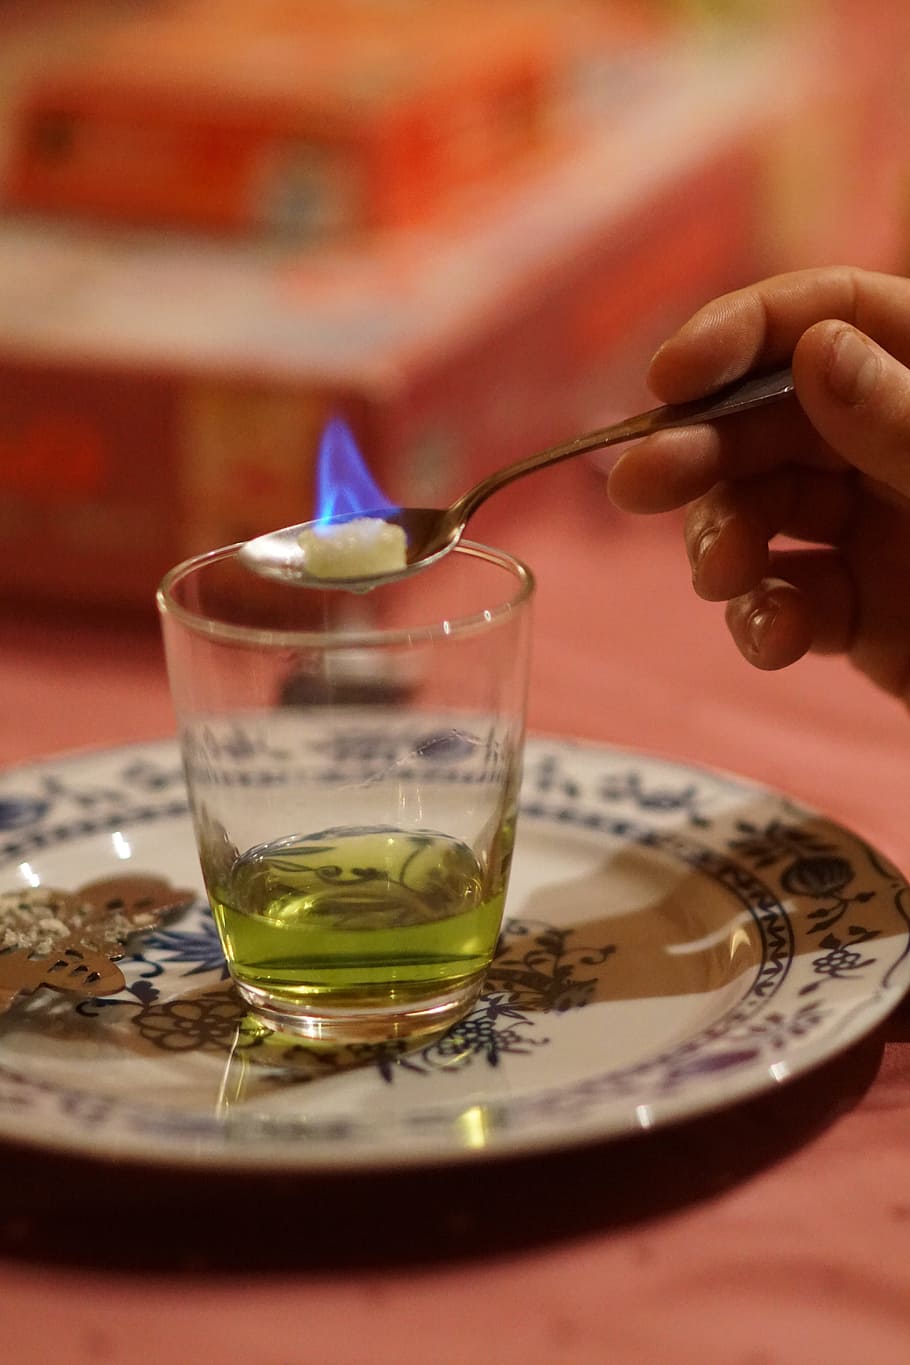 Absinthe, Blue Flame, Evening, drinking game, celebration, alcohol, sugar cube, food and drink, human hand, human body part